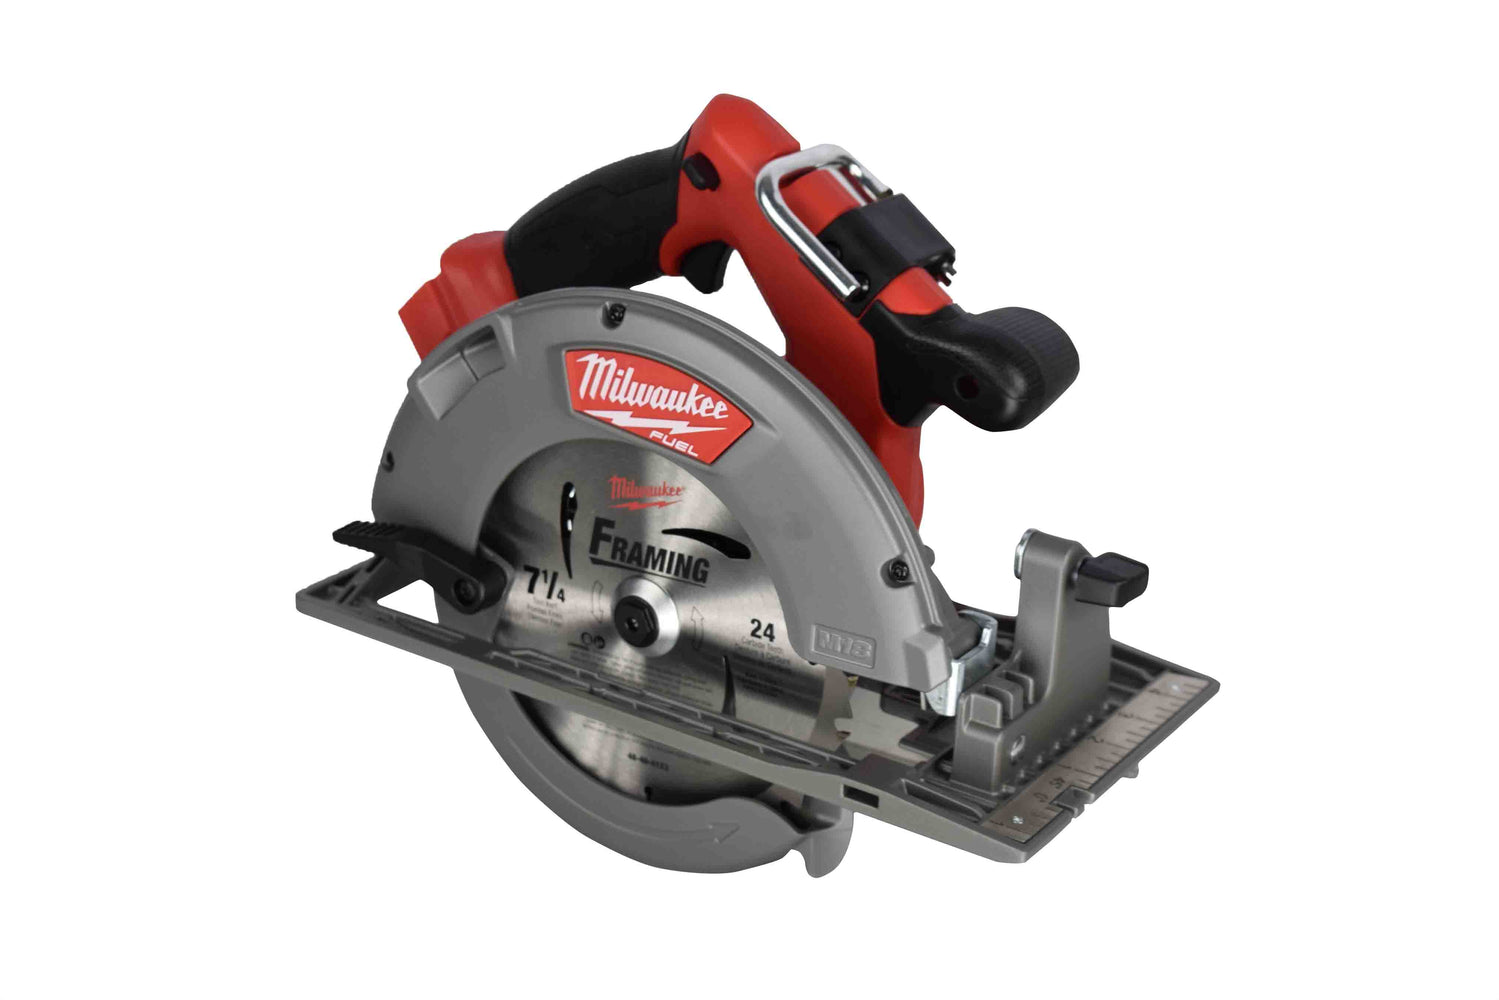 Milwaukee 2731-20 7-1/4-Inch Circular Saw M18 Fuel 18V Brushless Cordless 7-1/4 In